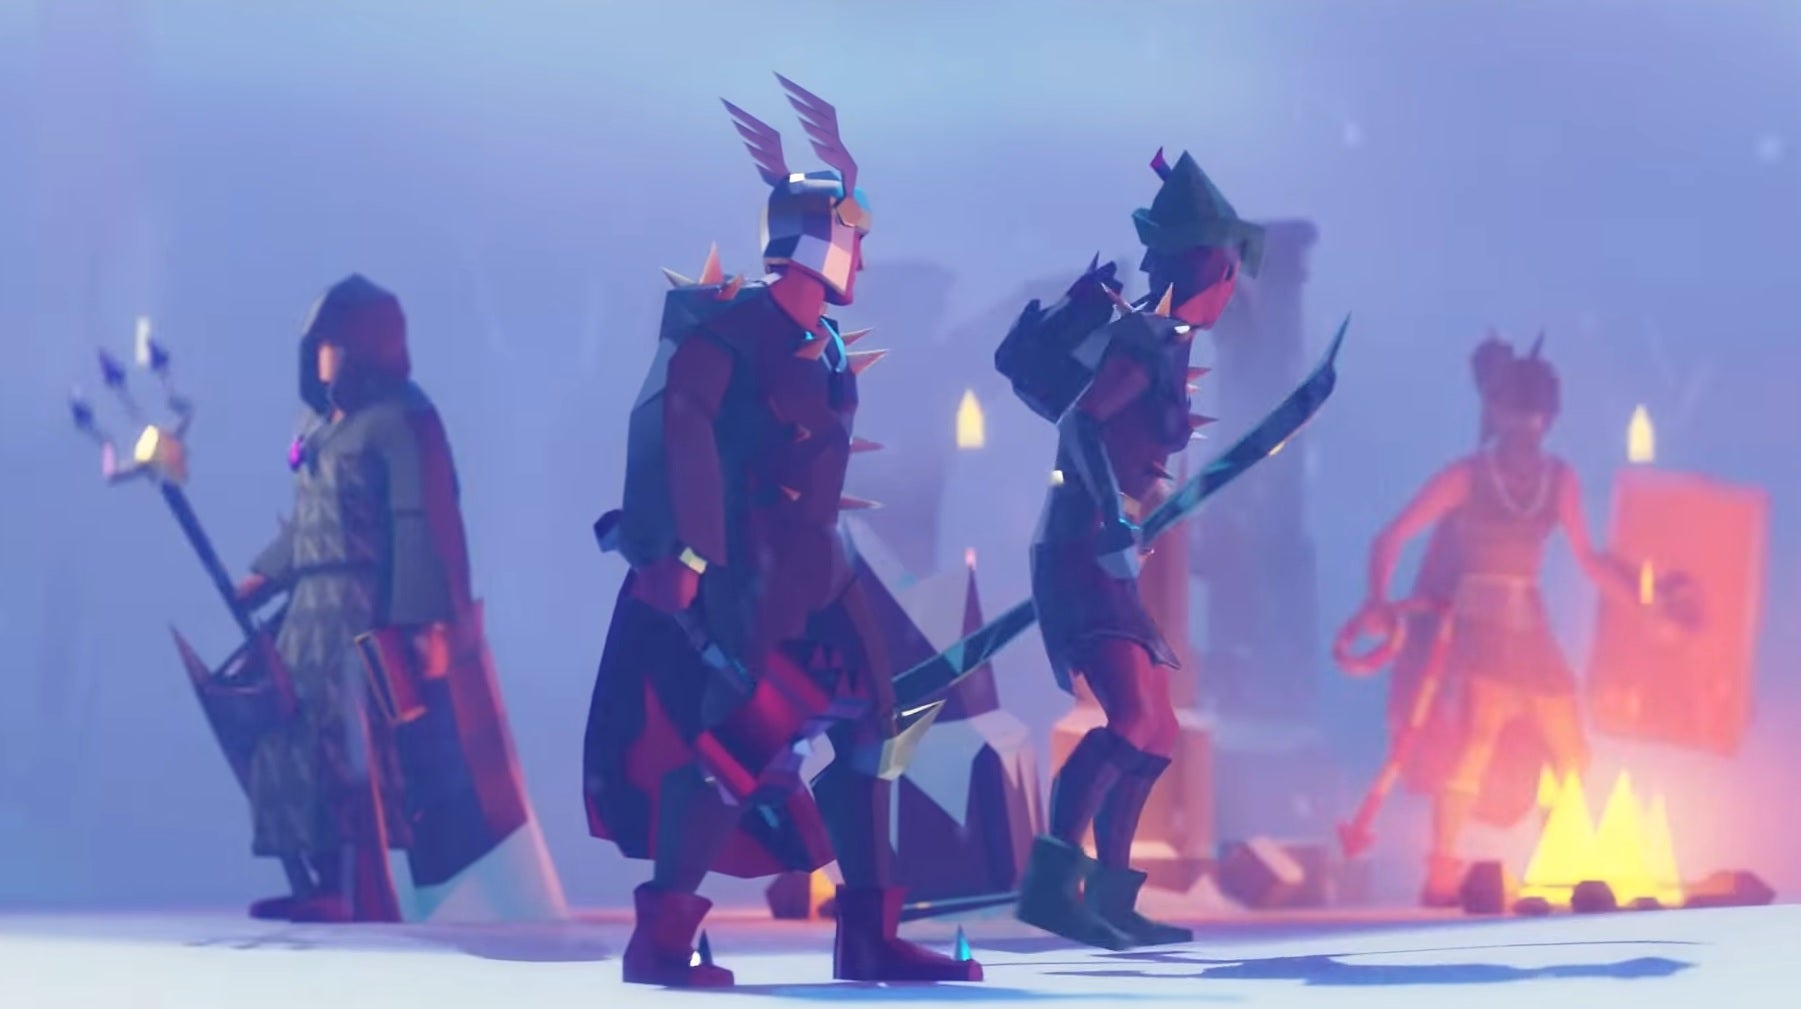 Old School RuneScape - A cinematic trailer shows a group of players back to back in a foggy, snowy ruin getting ready to fight.